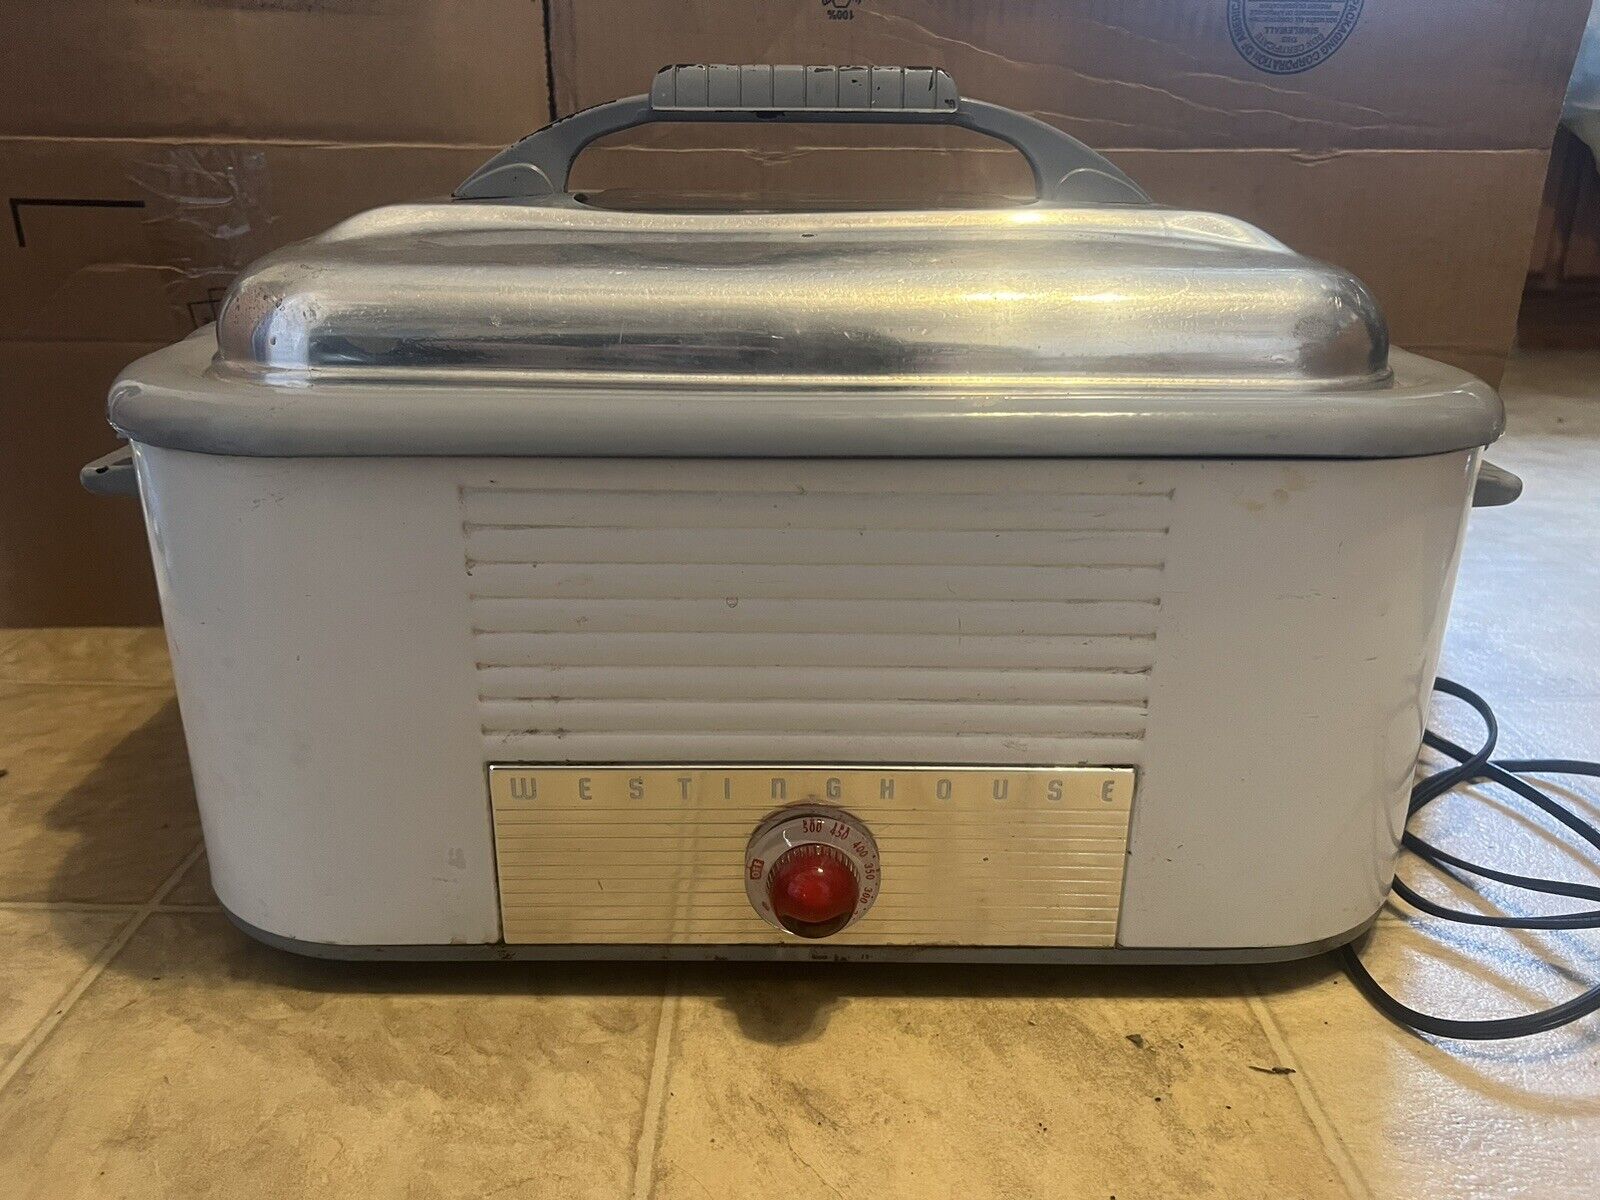 Vintage 1950s Westinghouse Electric Roaster Oven RO-91  18 qt WITH RACKS WORKS